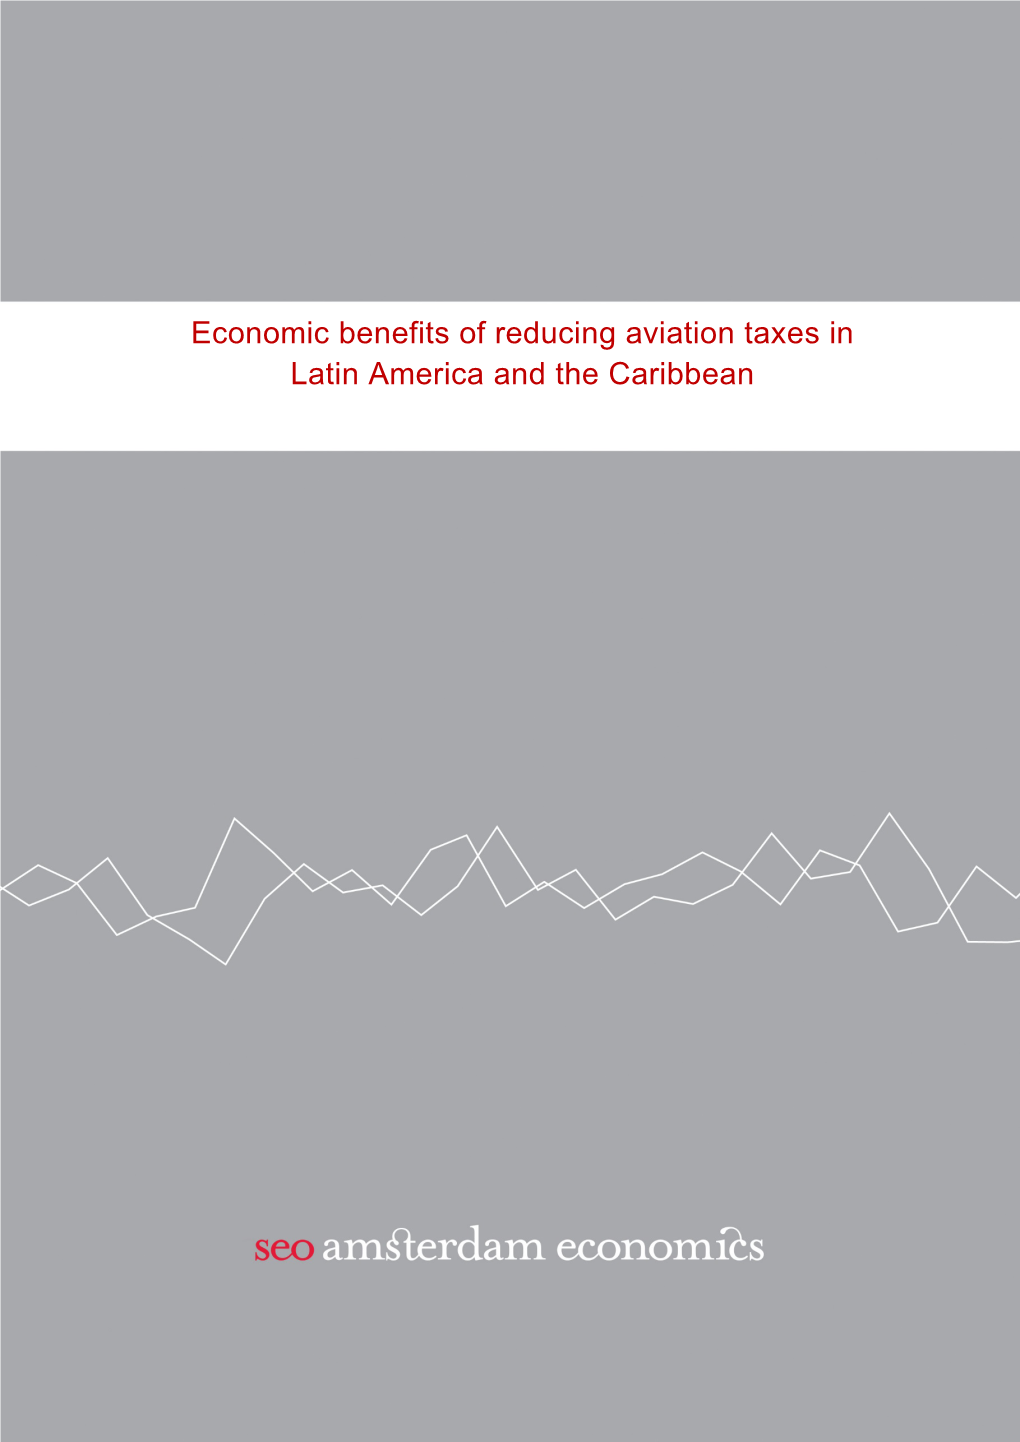 Economic Benefits of Reducing Aviation Taxes in Latin America and the Caribbean